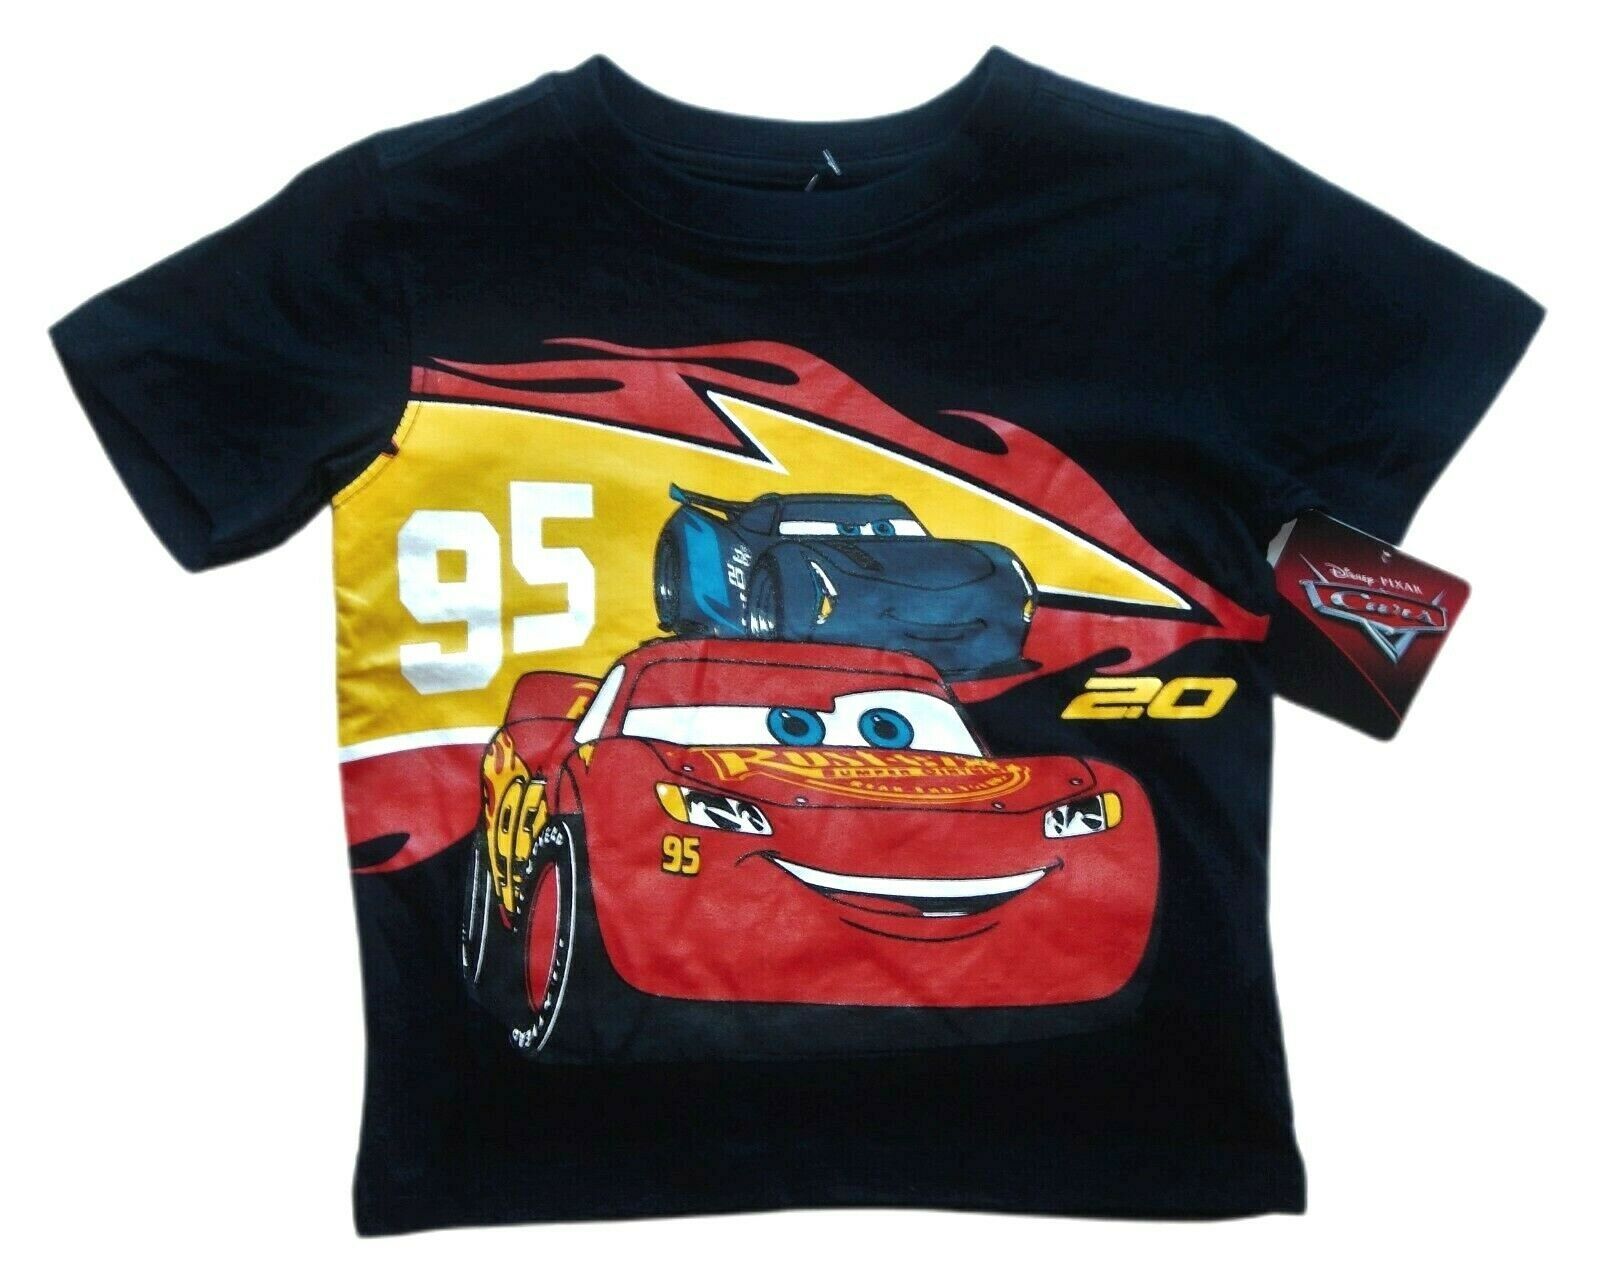 DISNEY CARS McQUEEN Boys Cotton Tee T-Shirt NWT Toddler's Size 2T, 3T or 4T